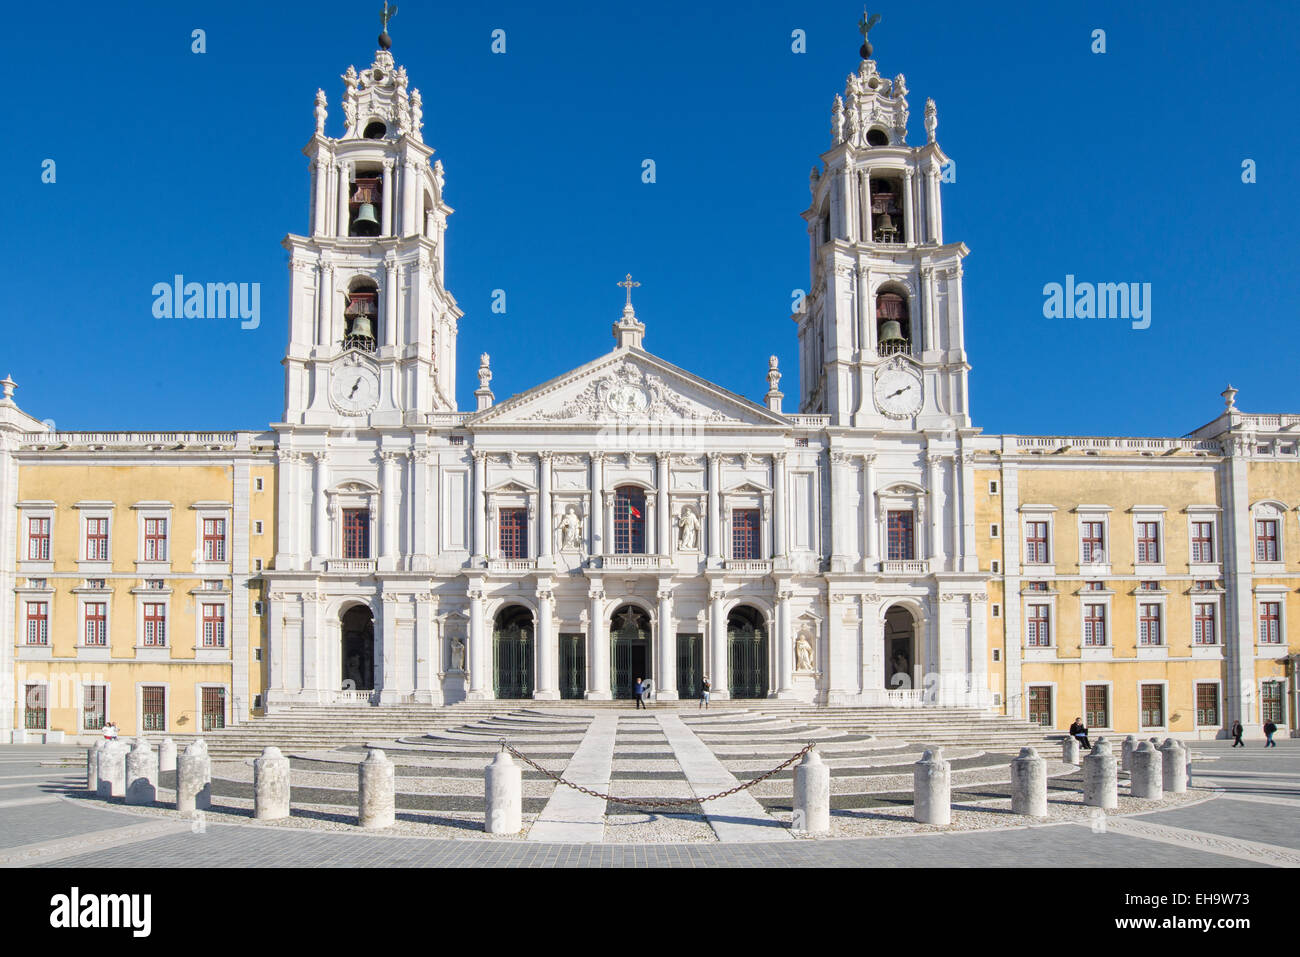 The Mafra National Palace is a monumental Baroque and Italianized Neoclassical palace-monastery located in Mafra, Stock Photo